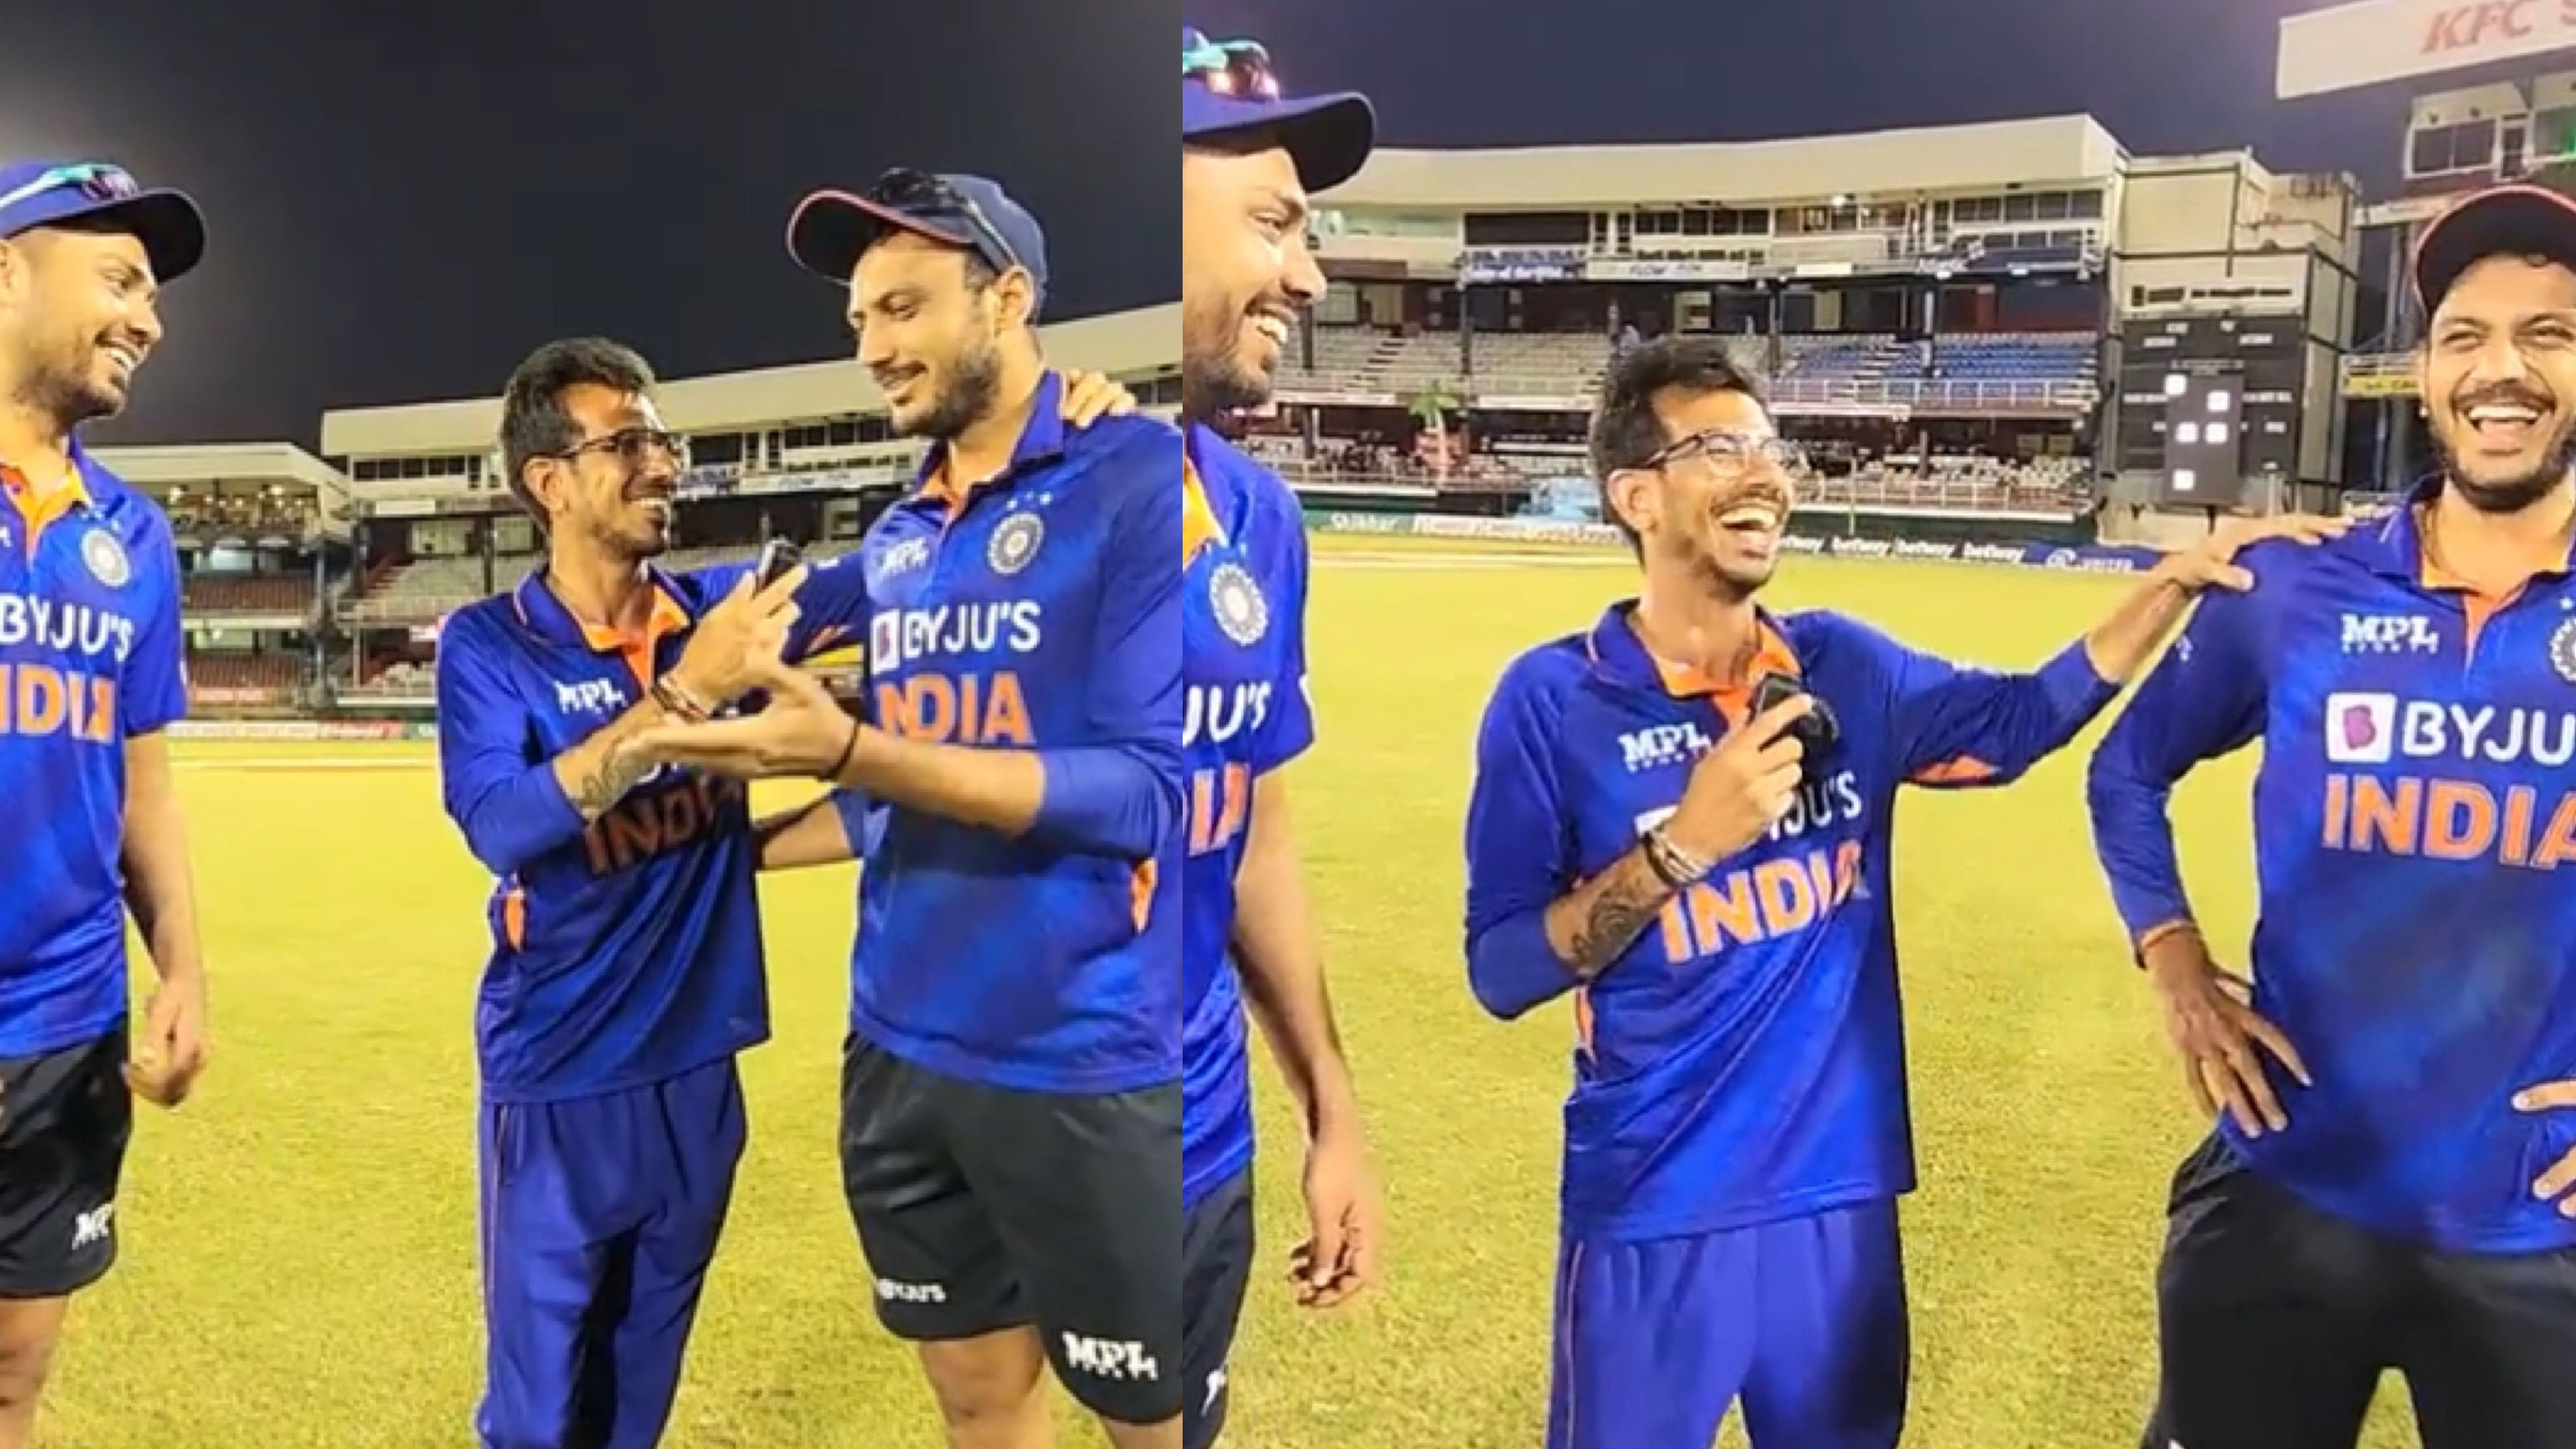 WI v IND 2022: WATCH - Hilarious interaction between Chahal, Akshar and Avesh on 'Chahal TV' after 2nd ODI